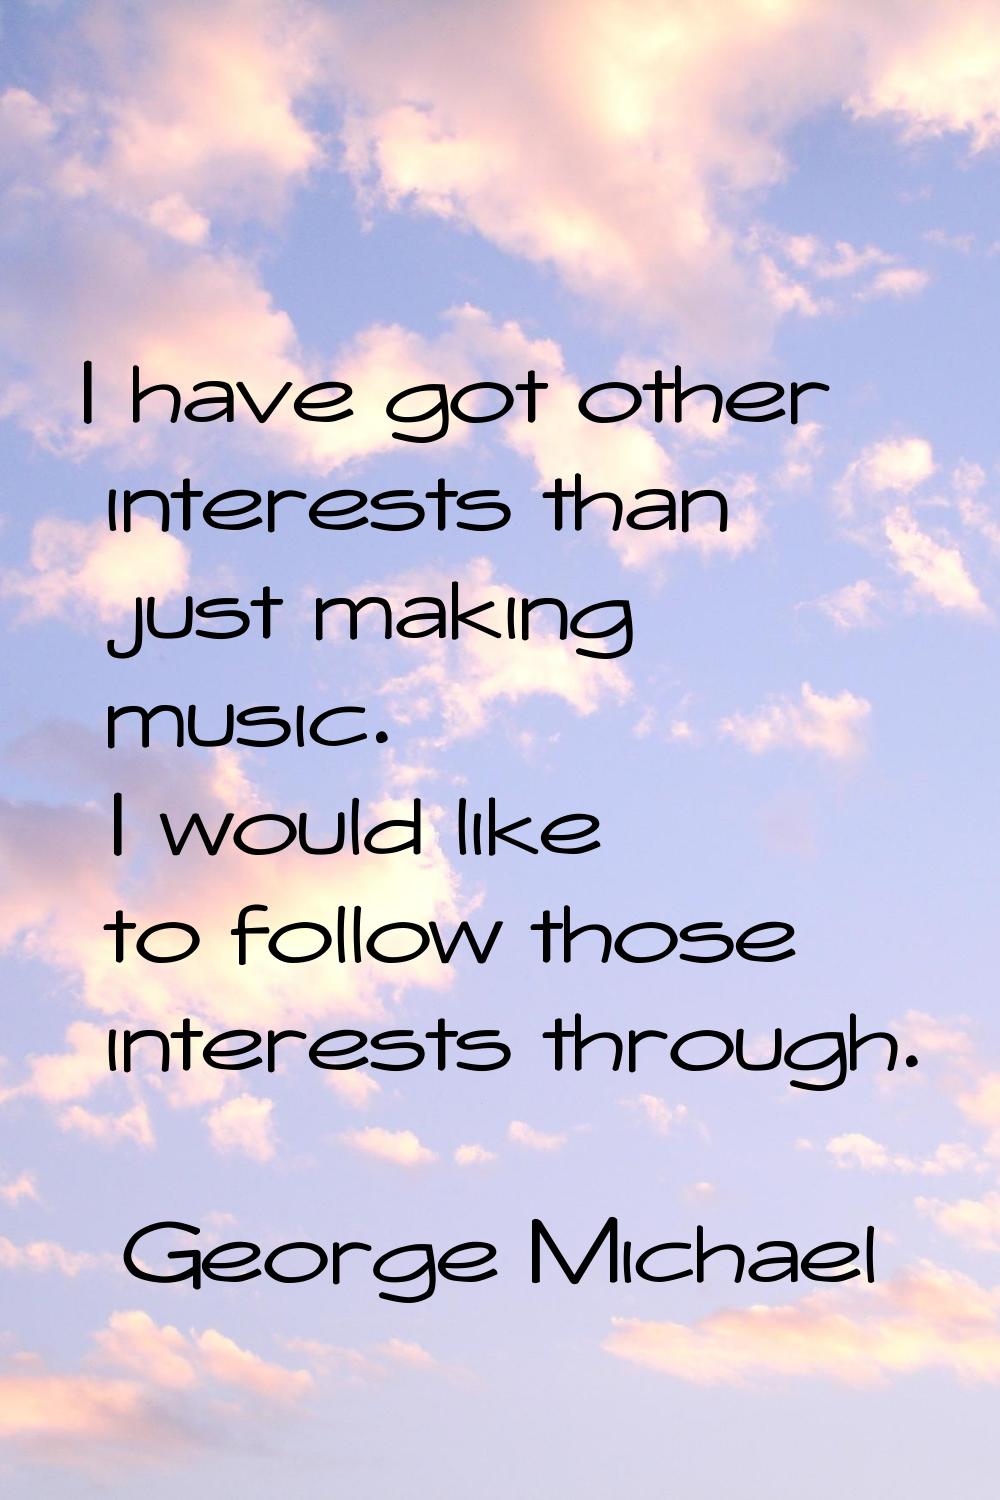 I have got other interests than just making music. I would like to follow those interests through.